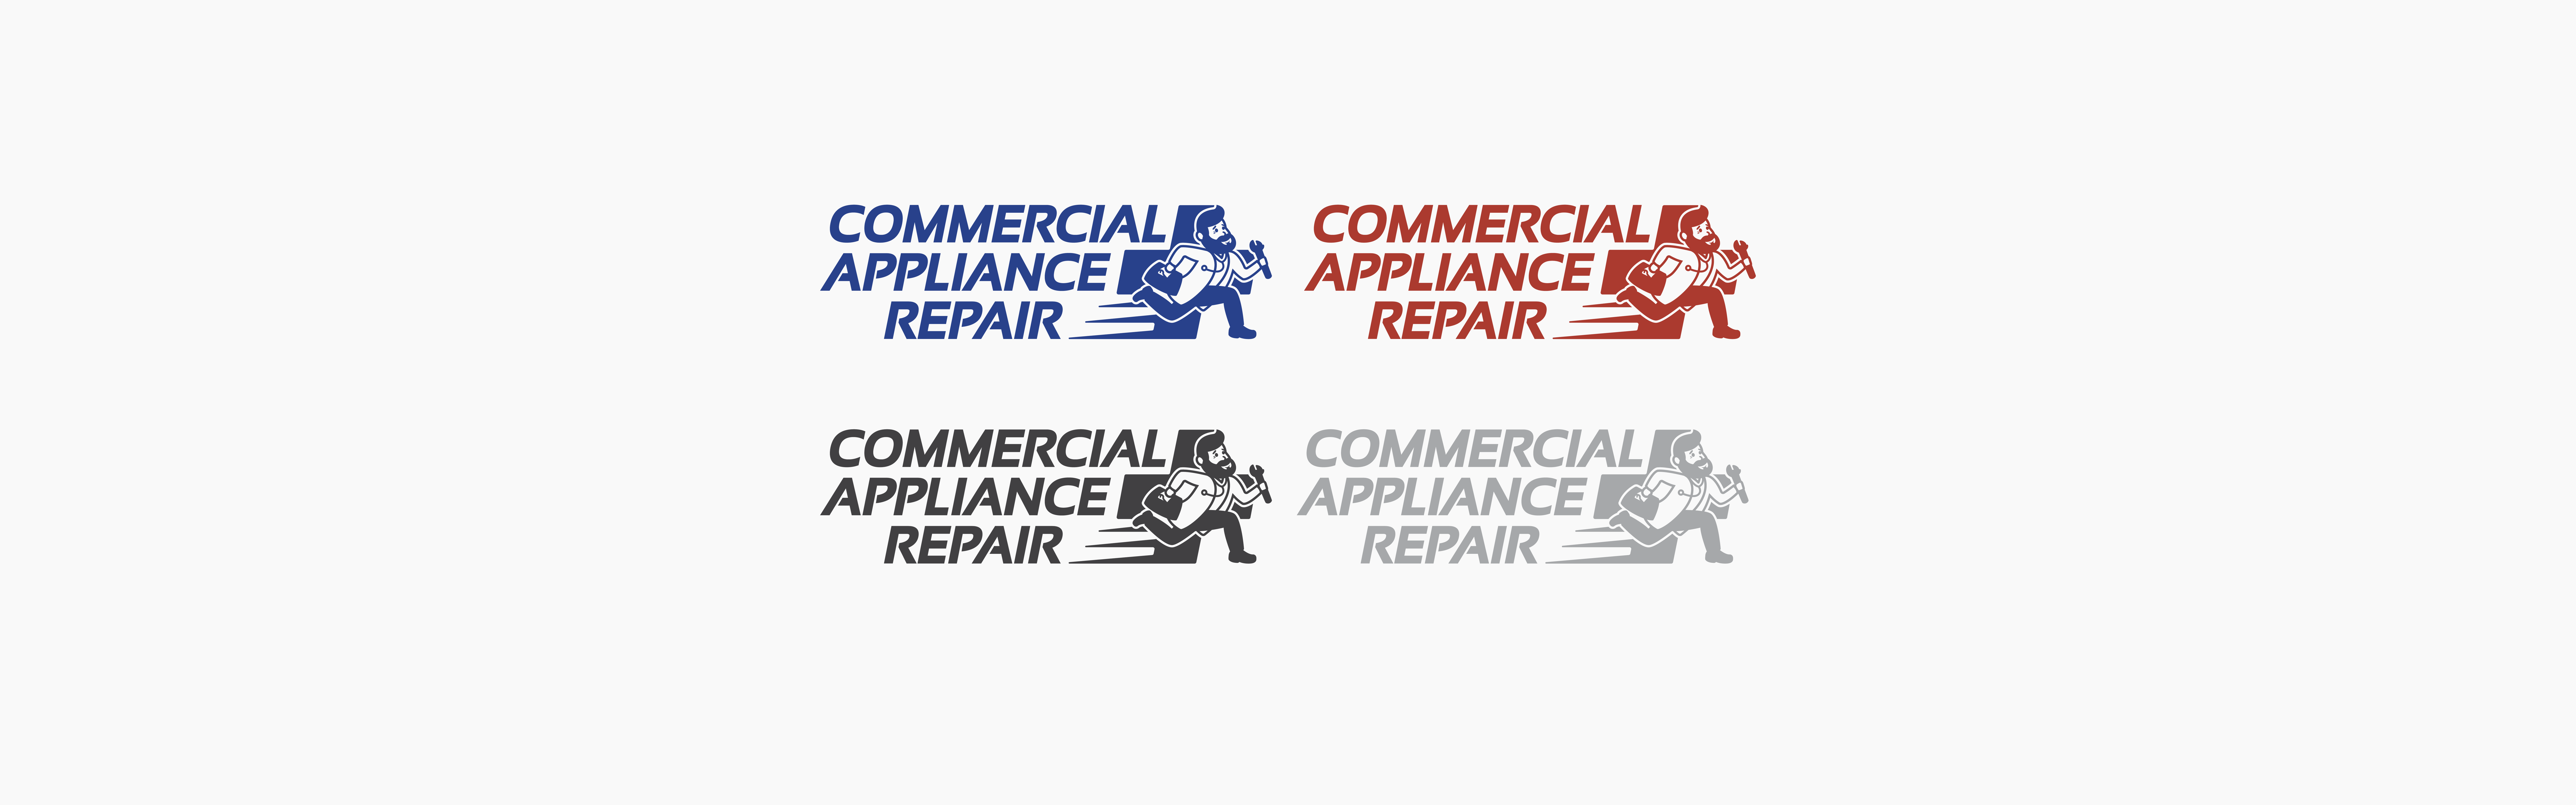 Four versions of a logo for "Commercial Appliance Repair," each with a different color combination, featuring the silhouette of a technician with a wrench.